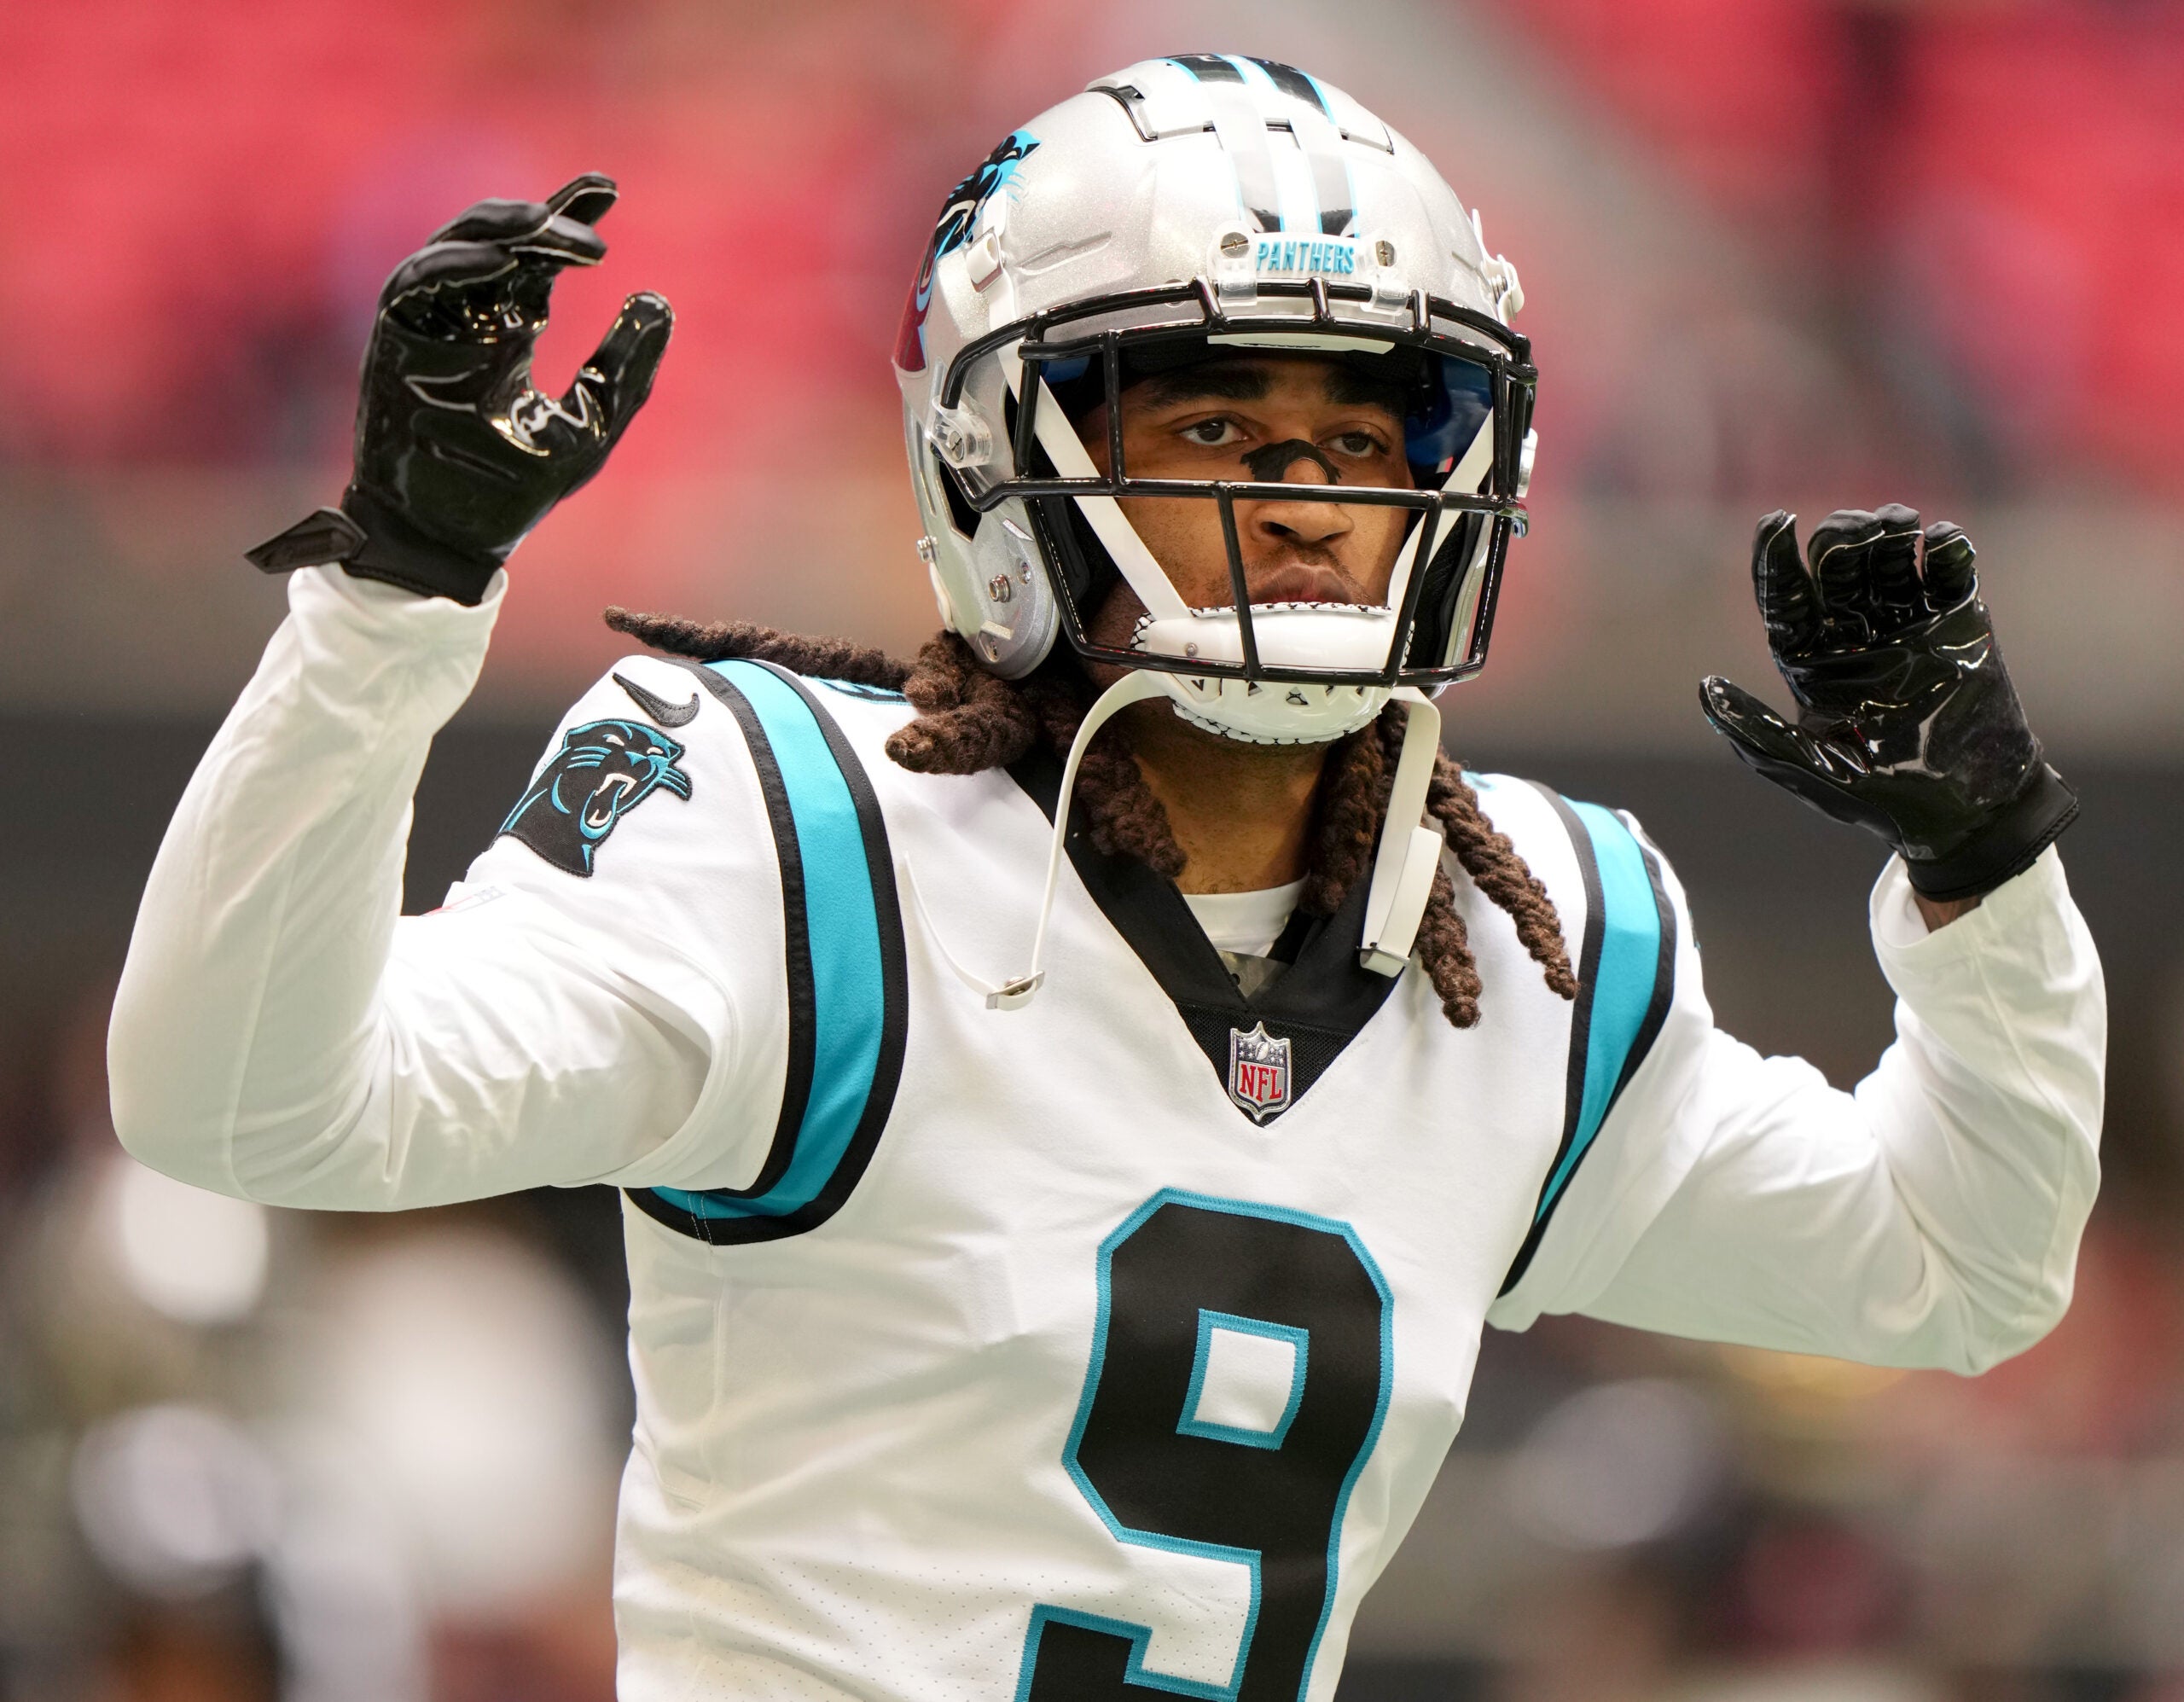 Gilmore: No hard feelings on Pats, excited to join Panthers